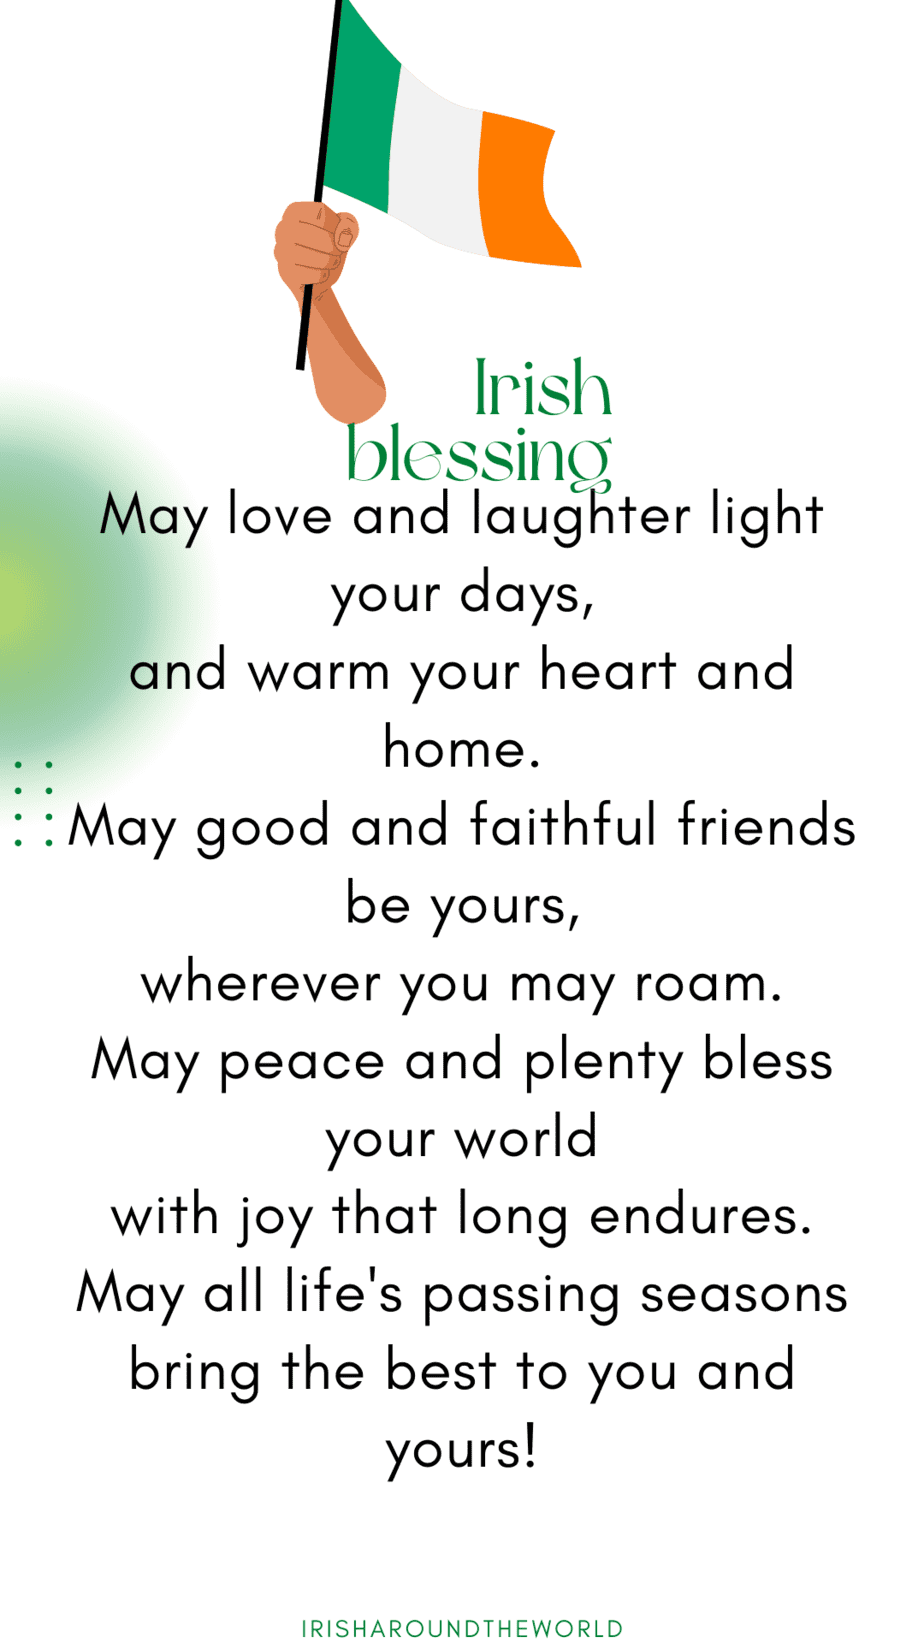 Irish blessing about love